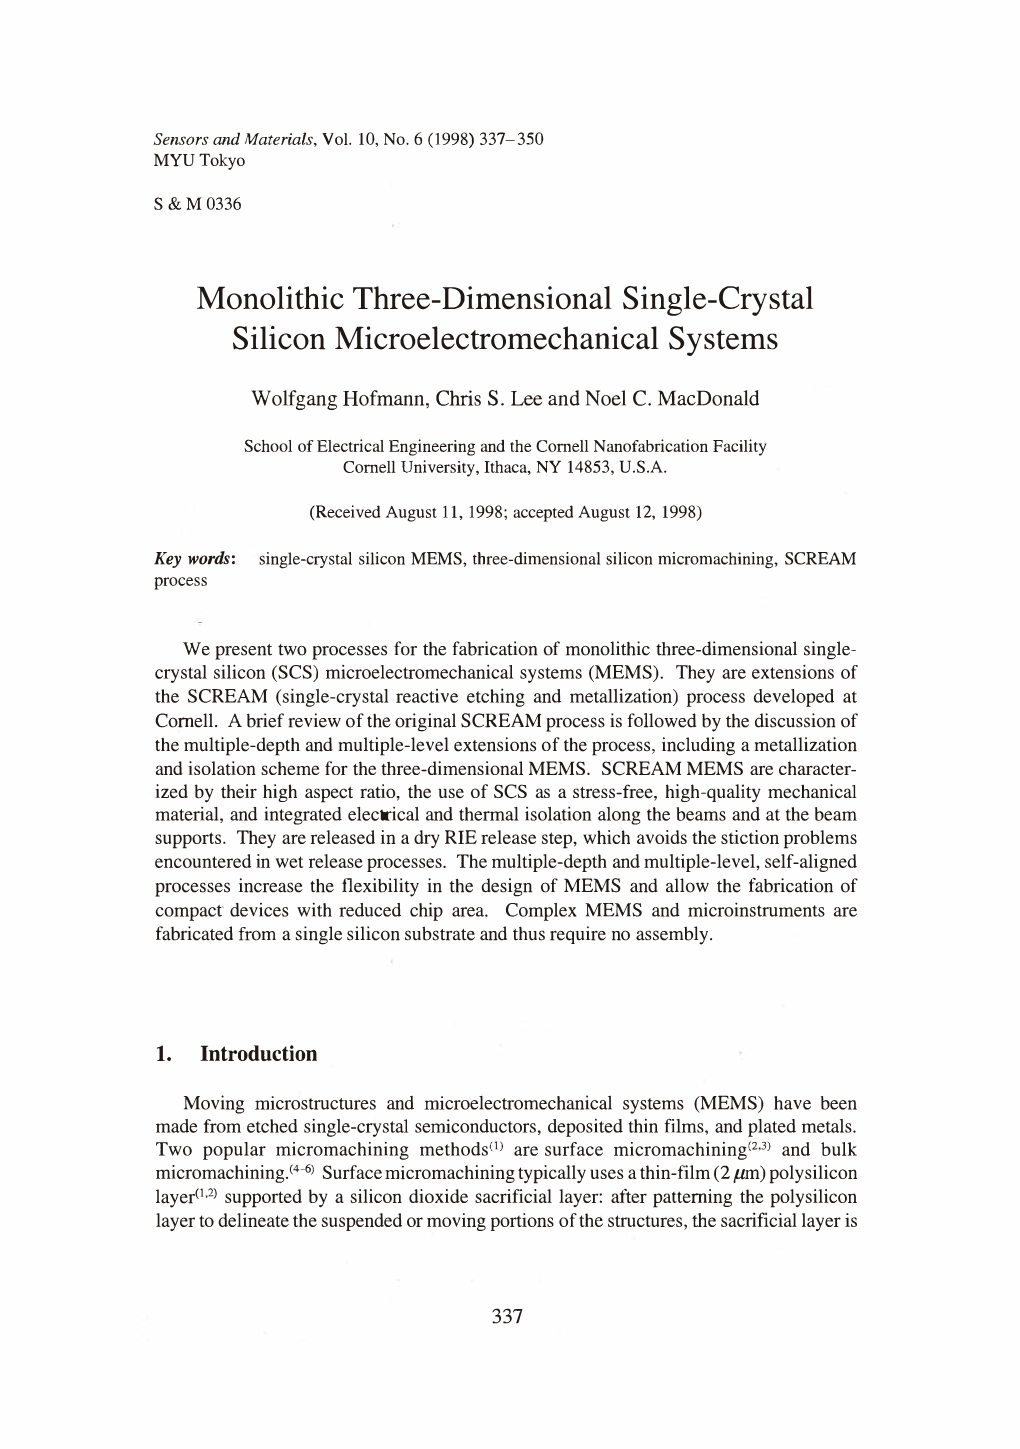 Monolithic Three-Dimensional Single-Crystal Silicon Microelectromechanical Systems